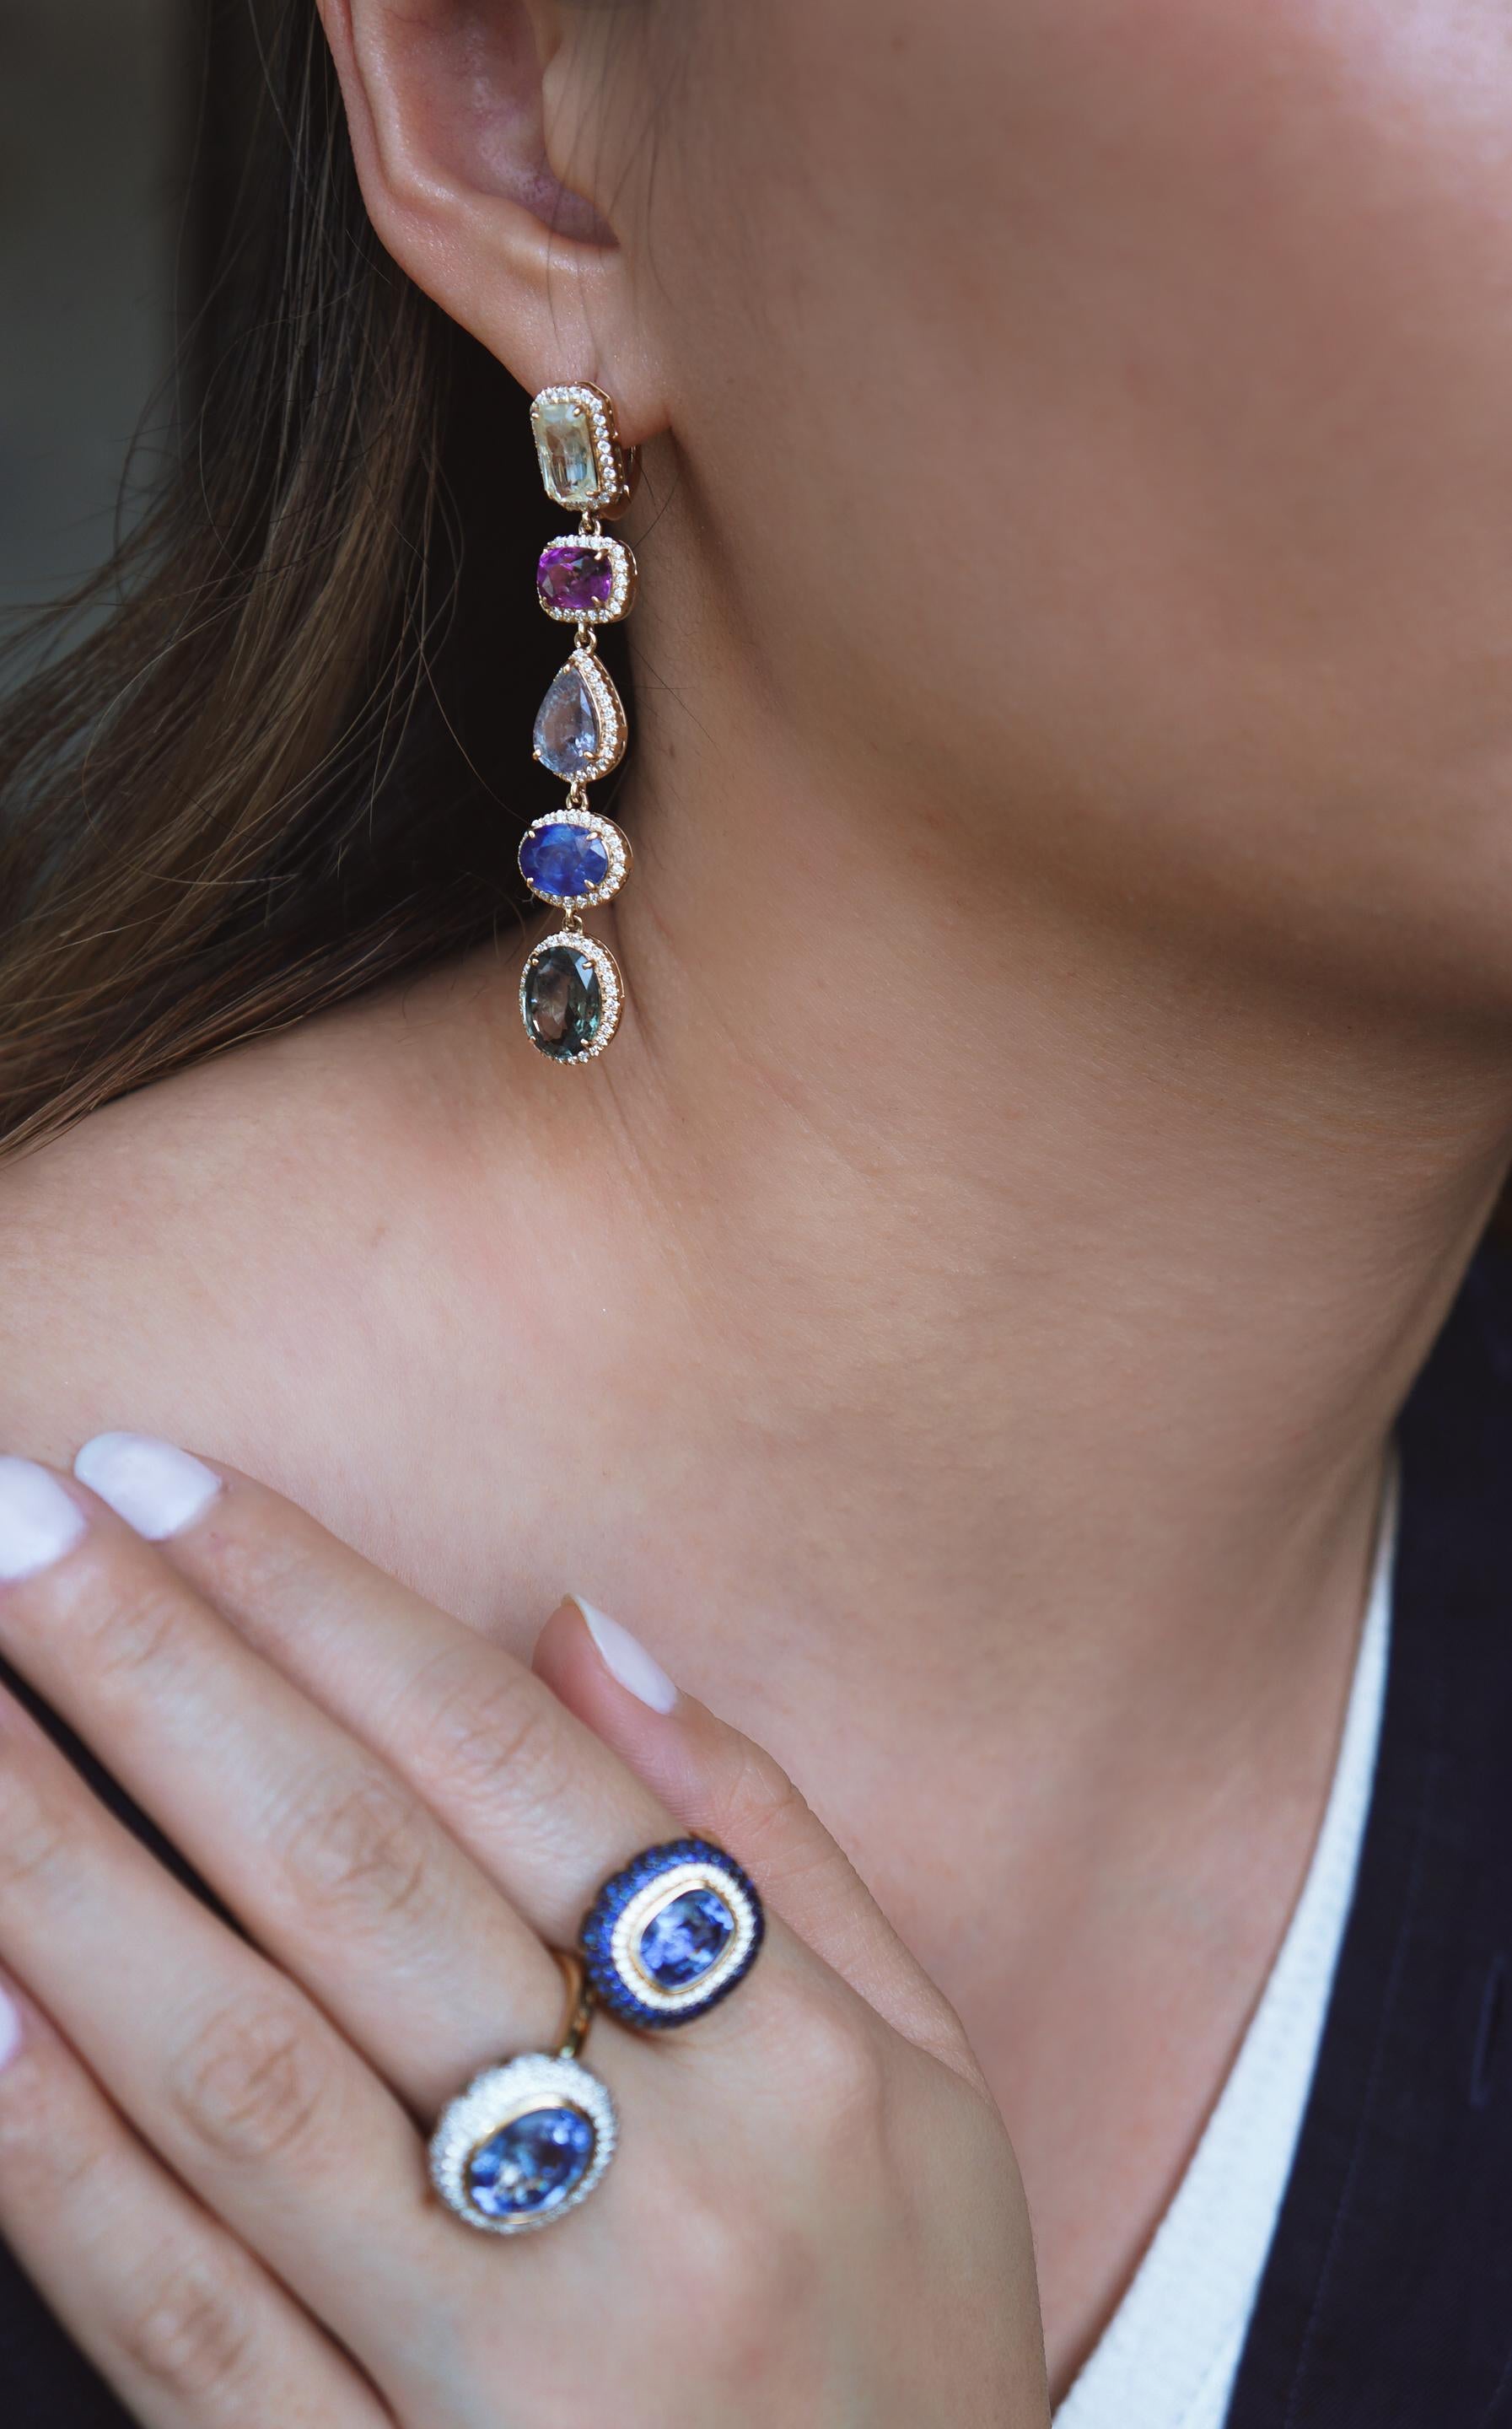 A hallmark of RiNoor jewelry - discovering the most dazzling gemstones and using the finest craftsmanship to create intricate inlays in various gemstones. These long and elegant earrings provide an edgy twist with over 20 cts of gorgeous sapphires